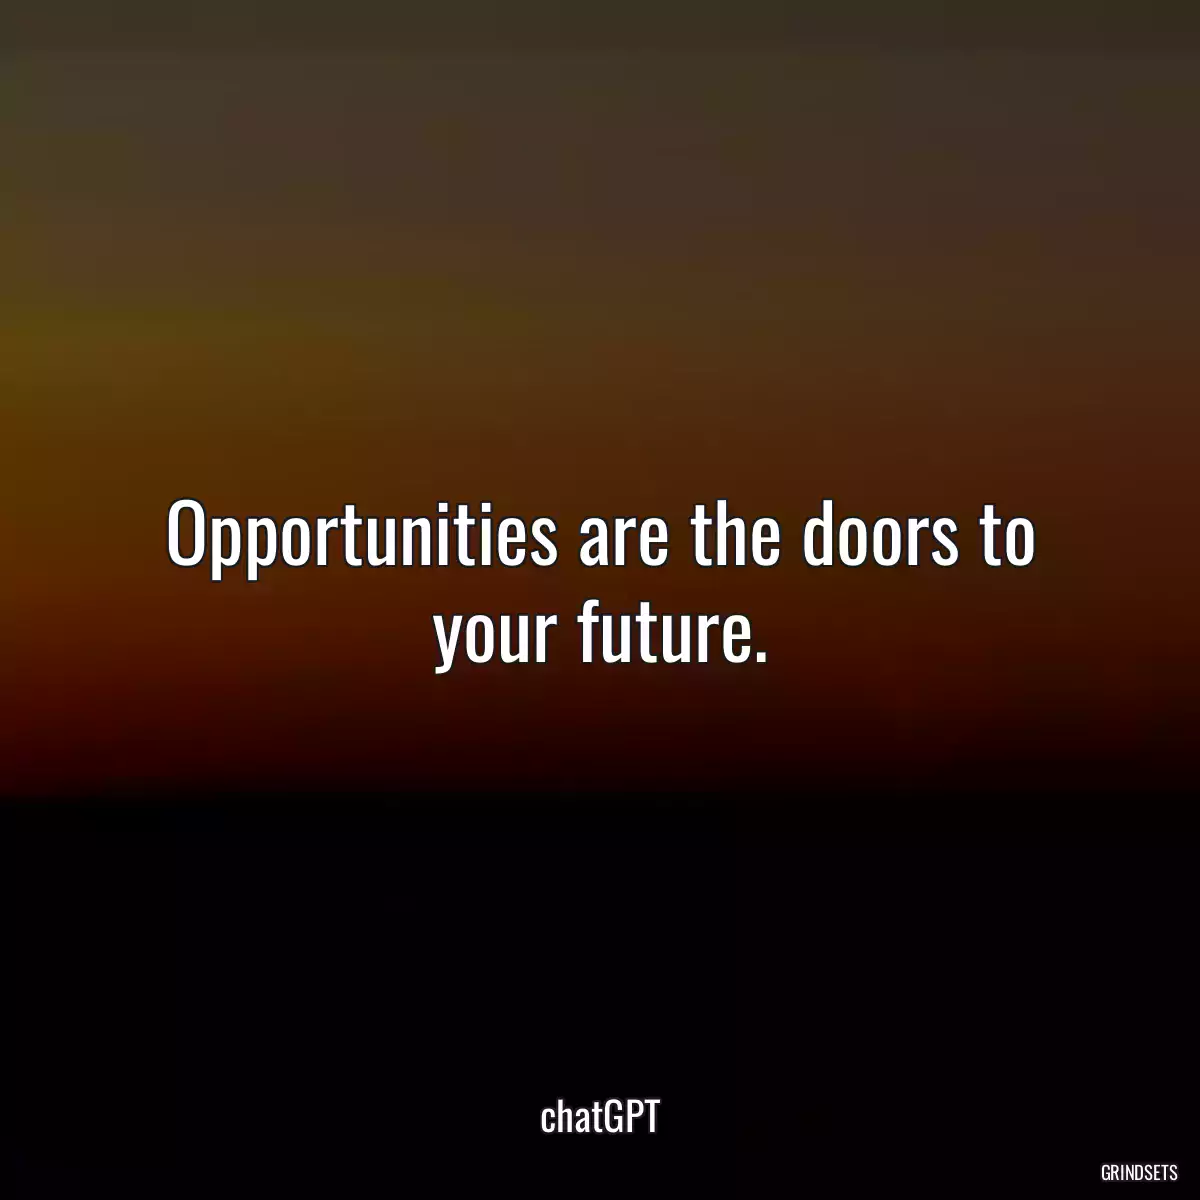 Opportunities are the doors to your future.